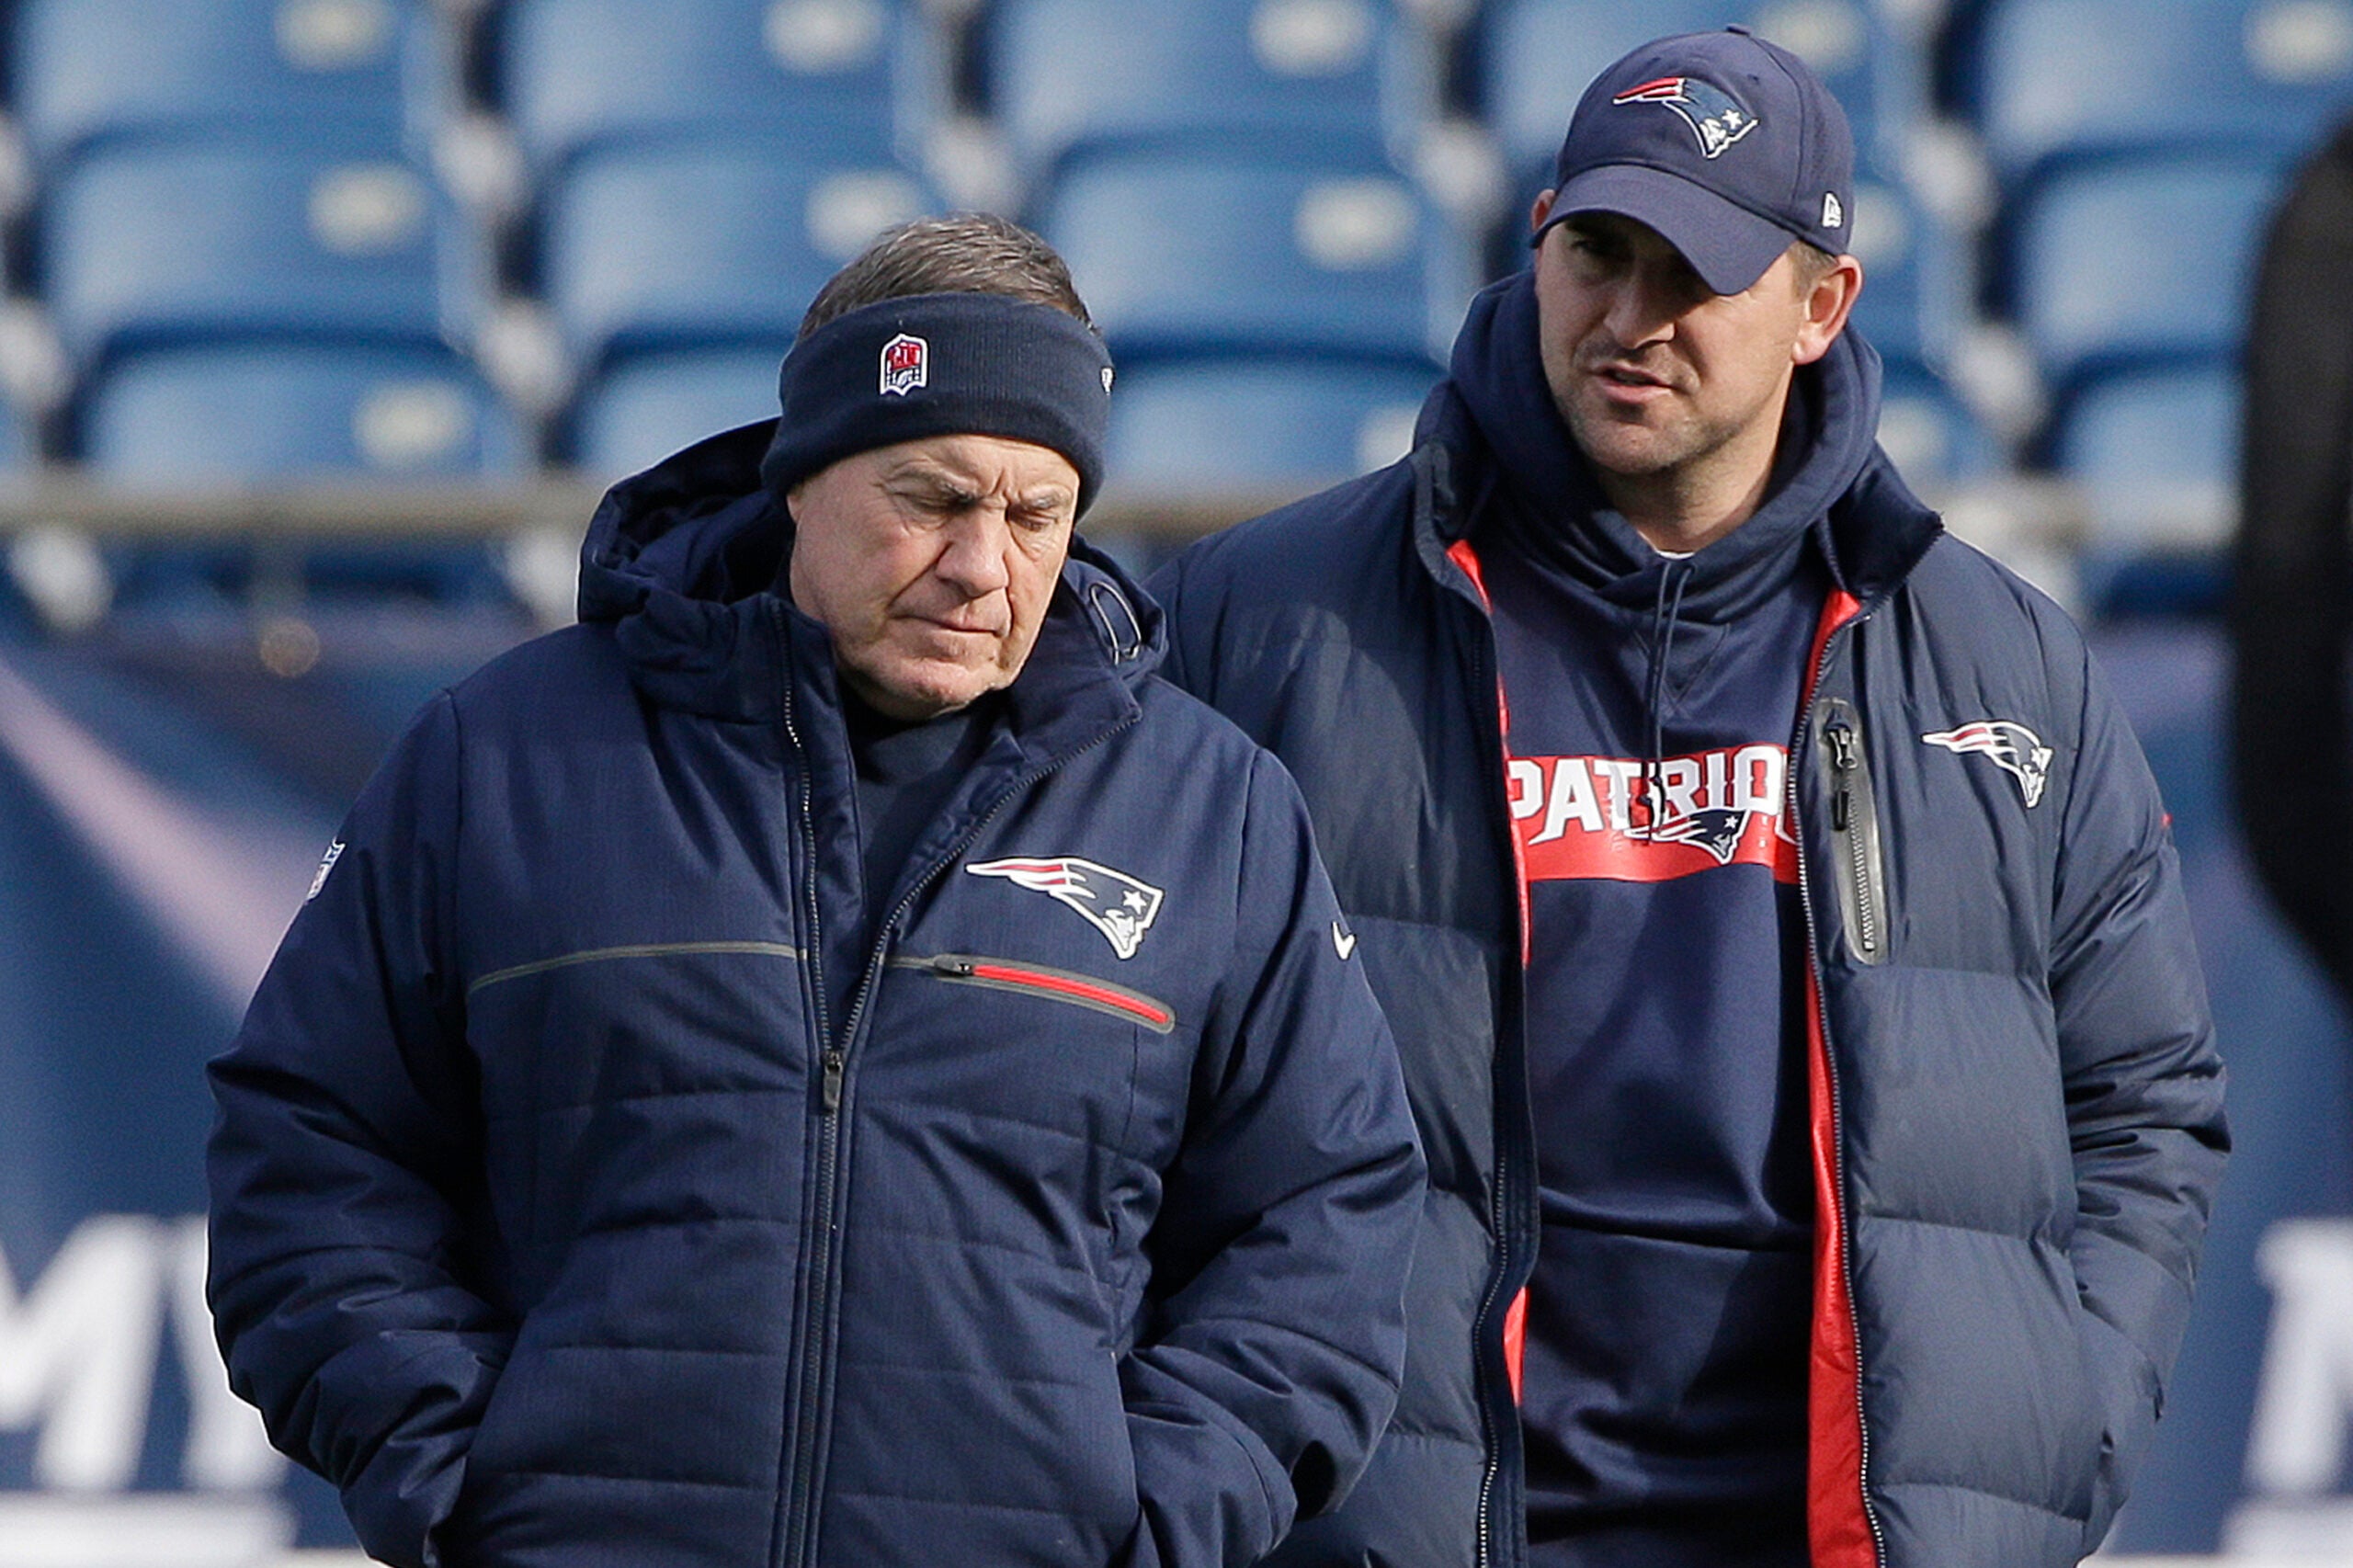 In this Dec. 20, 2018, file photo, New England Patriots head coach Bill Belichick, left, speaks with special teams coach Joe Judge, right, during NFL football practice in Foxborough, Mass.